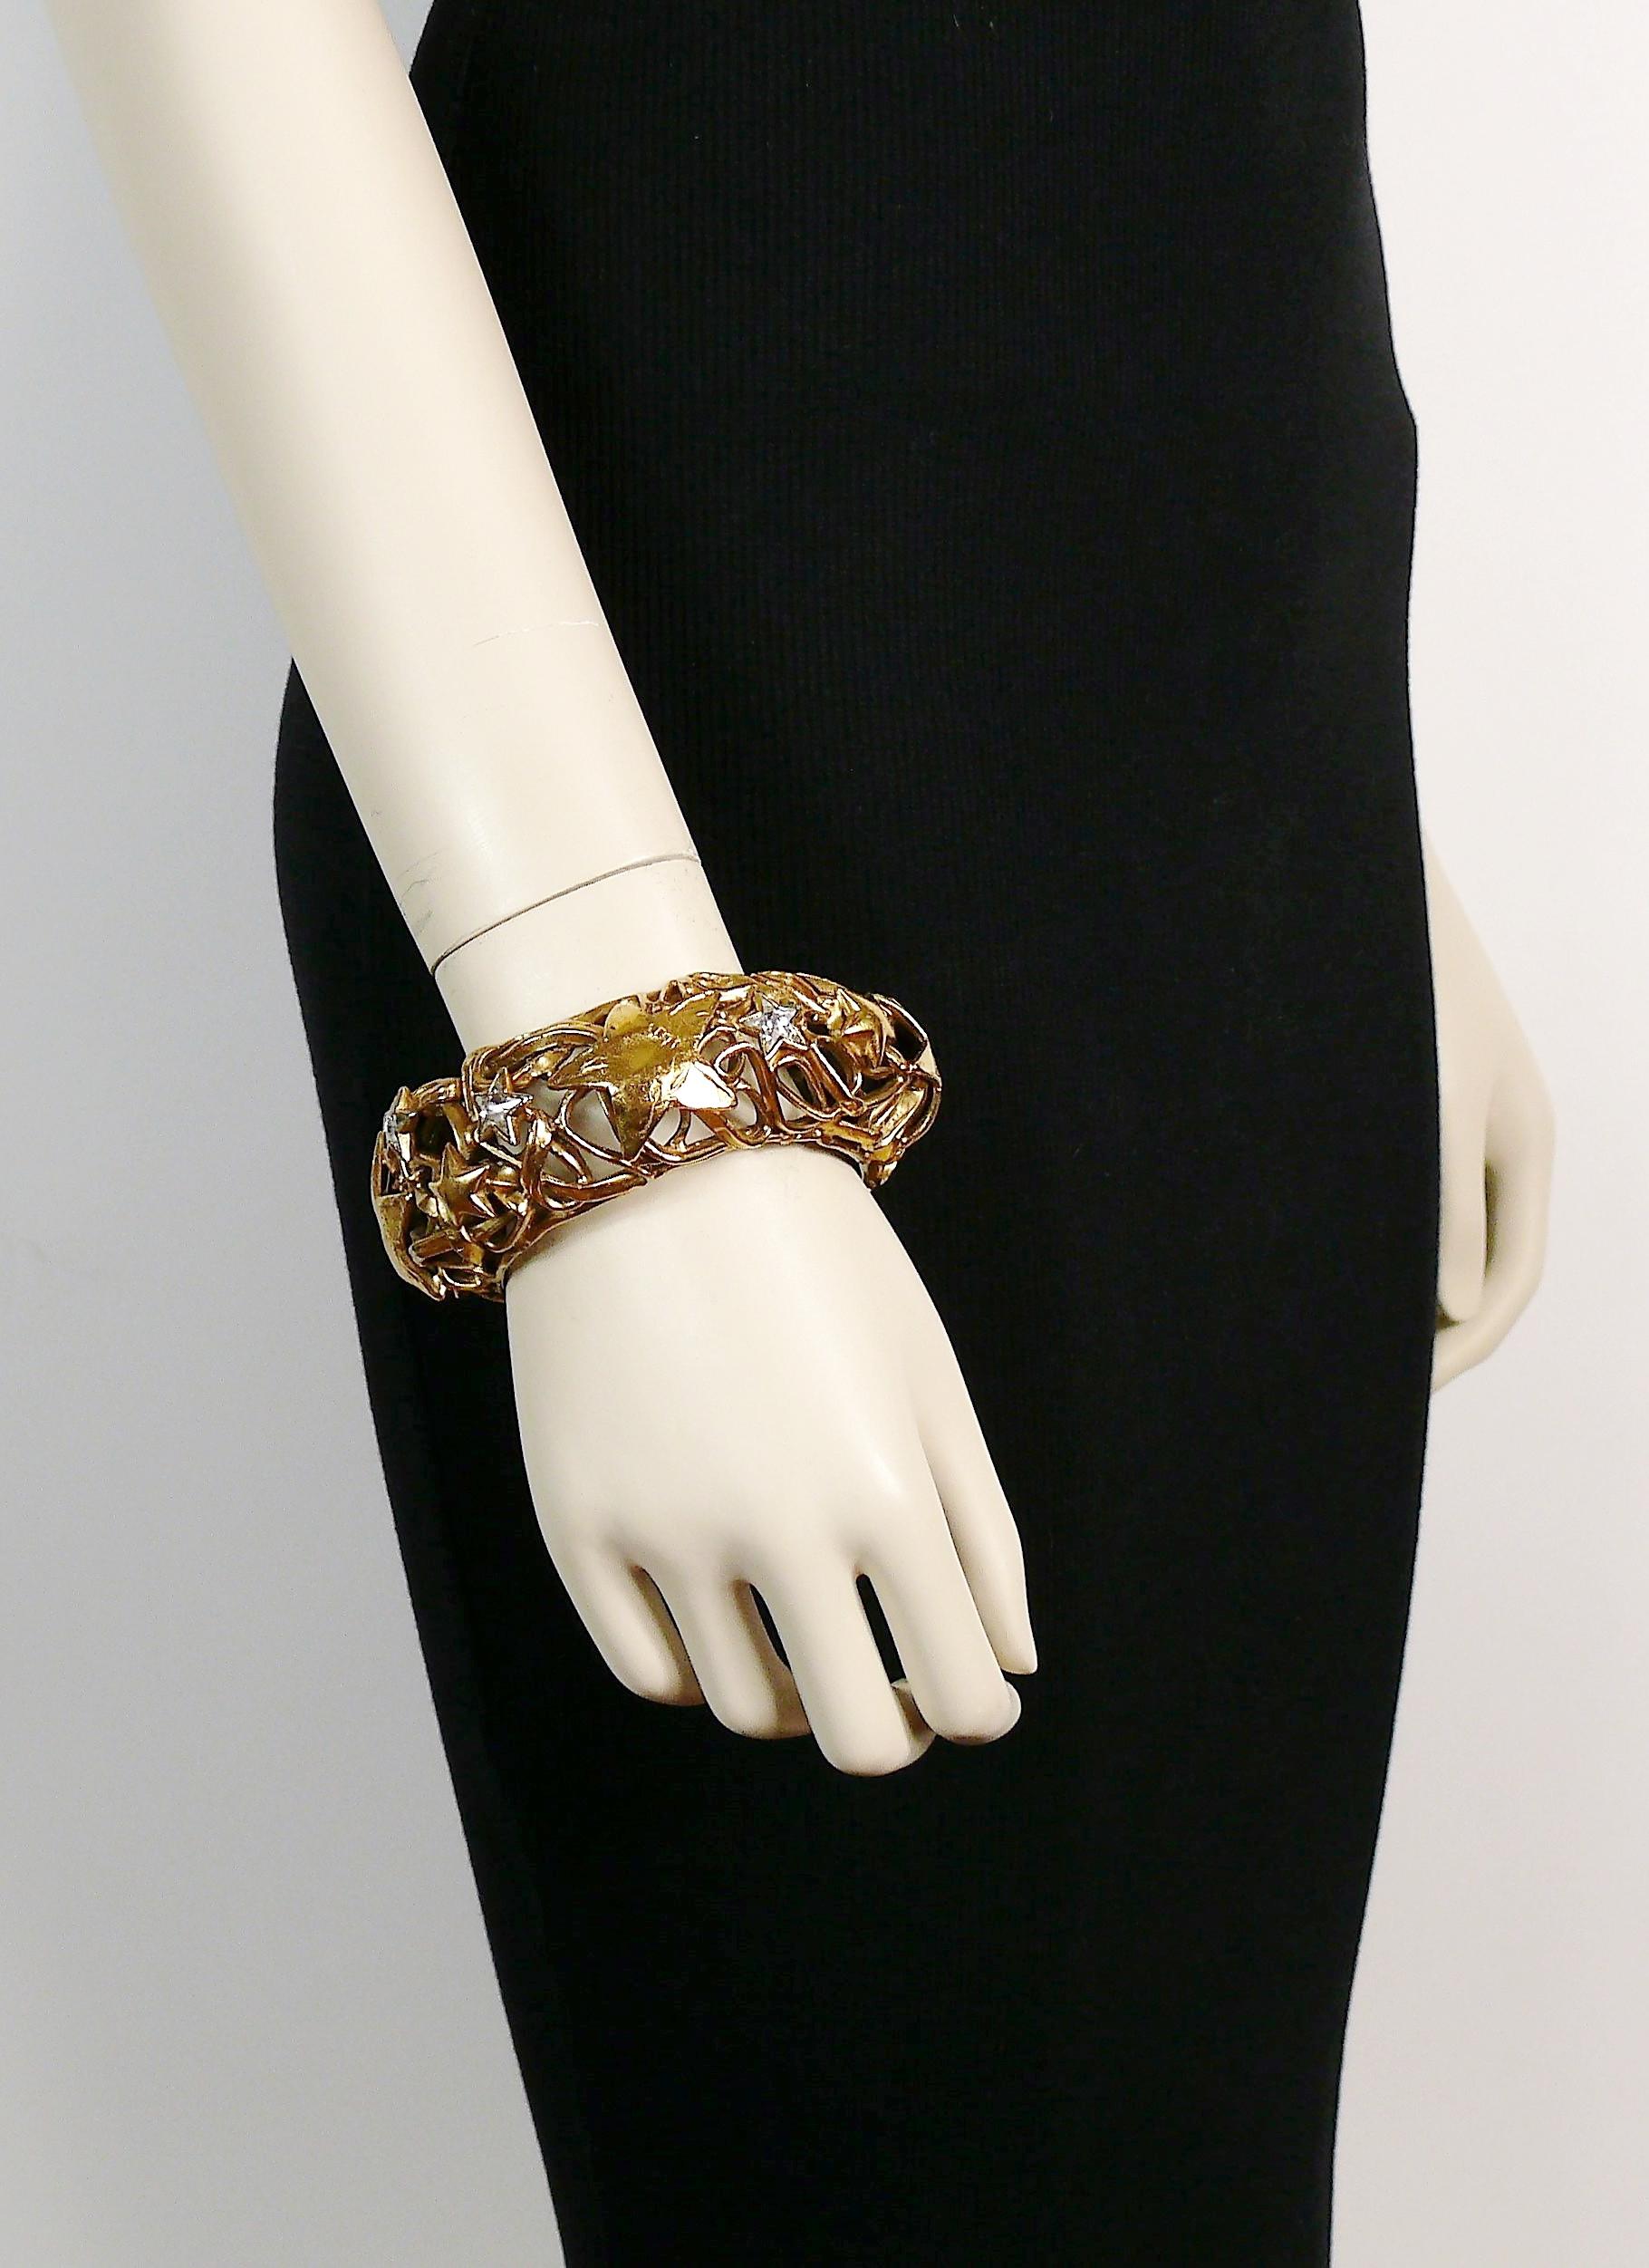 YVES SAINT LAURENT vintage rare gold toned cuff bracelet featuring a coiled wire pattern, stars and star-shaped clear crystals.

Slips on.

Embossed YVES SAINT LAURENT RIVE GAUCHE Made in France.

Indicative measurements : inner circumference